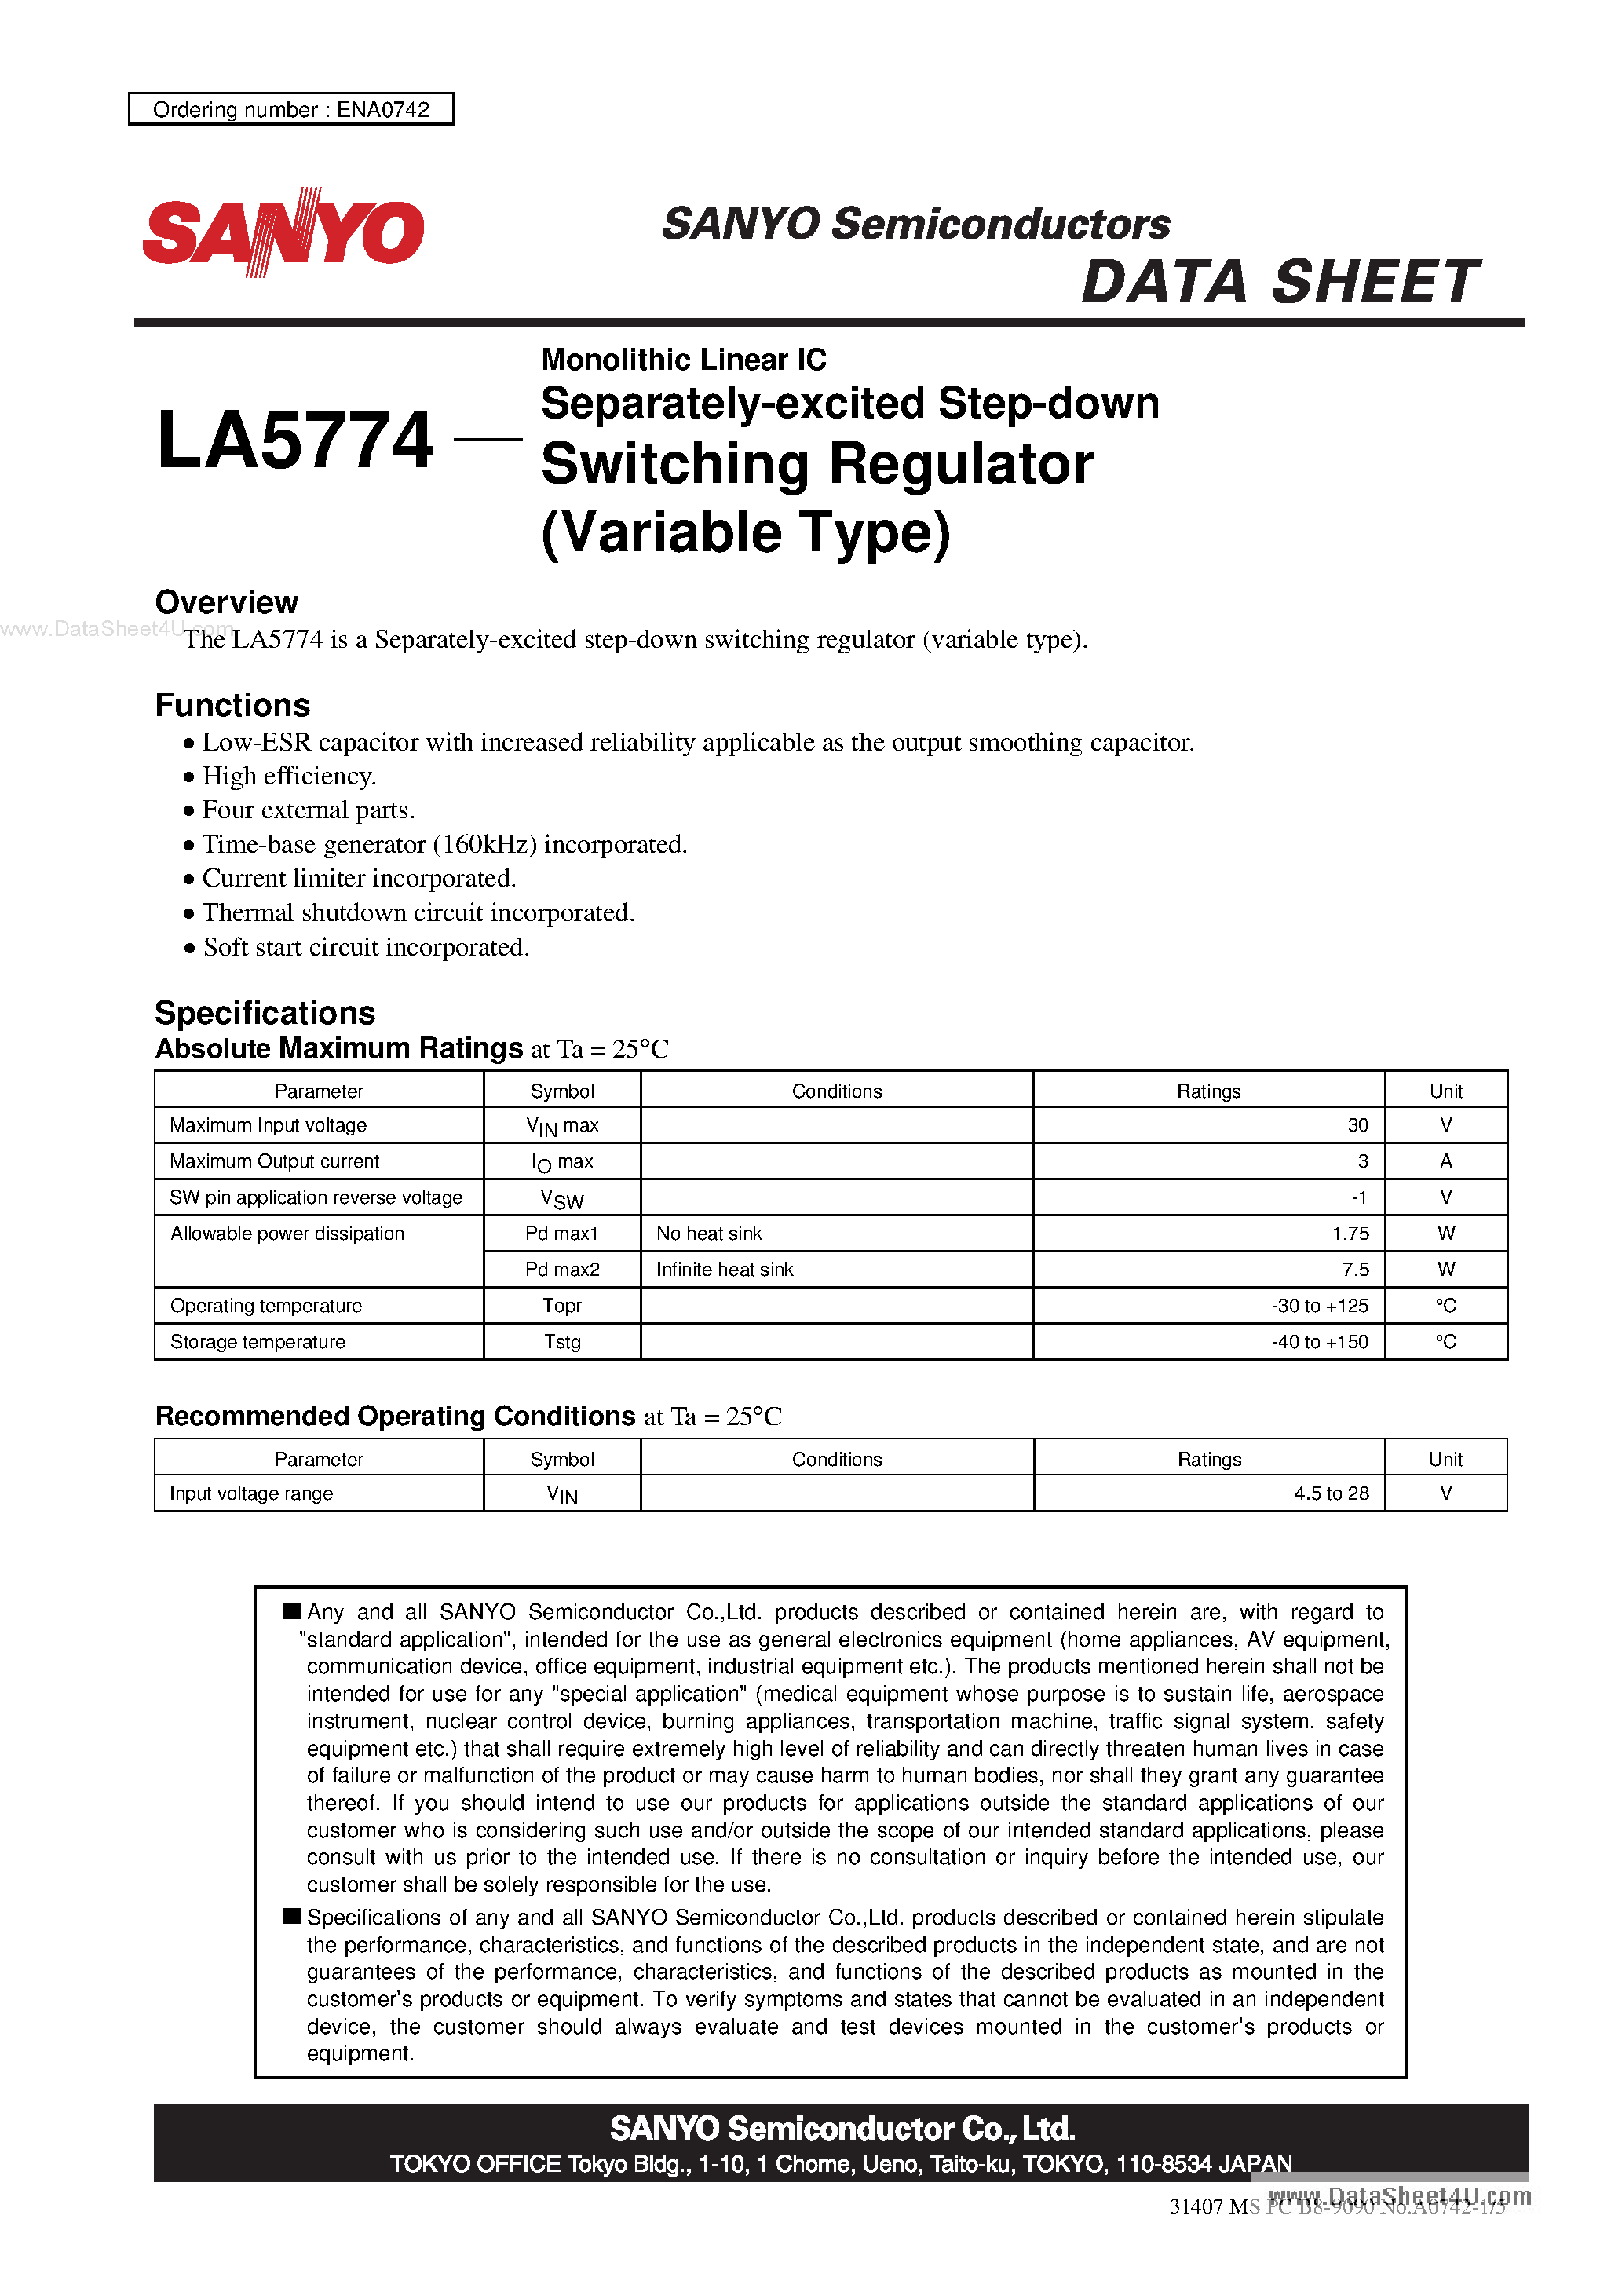 Даташит LA5774 - Monolithic Linear IC Separately-Excited Step-Down Switching Regulator страница 1